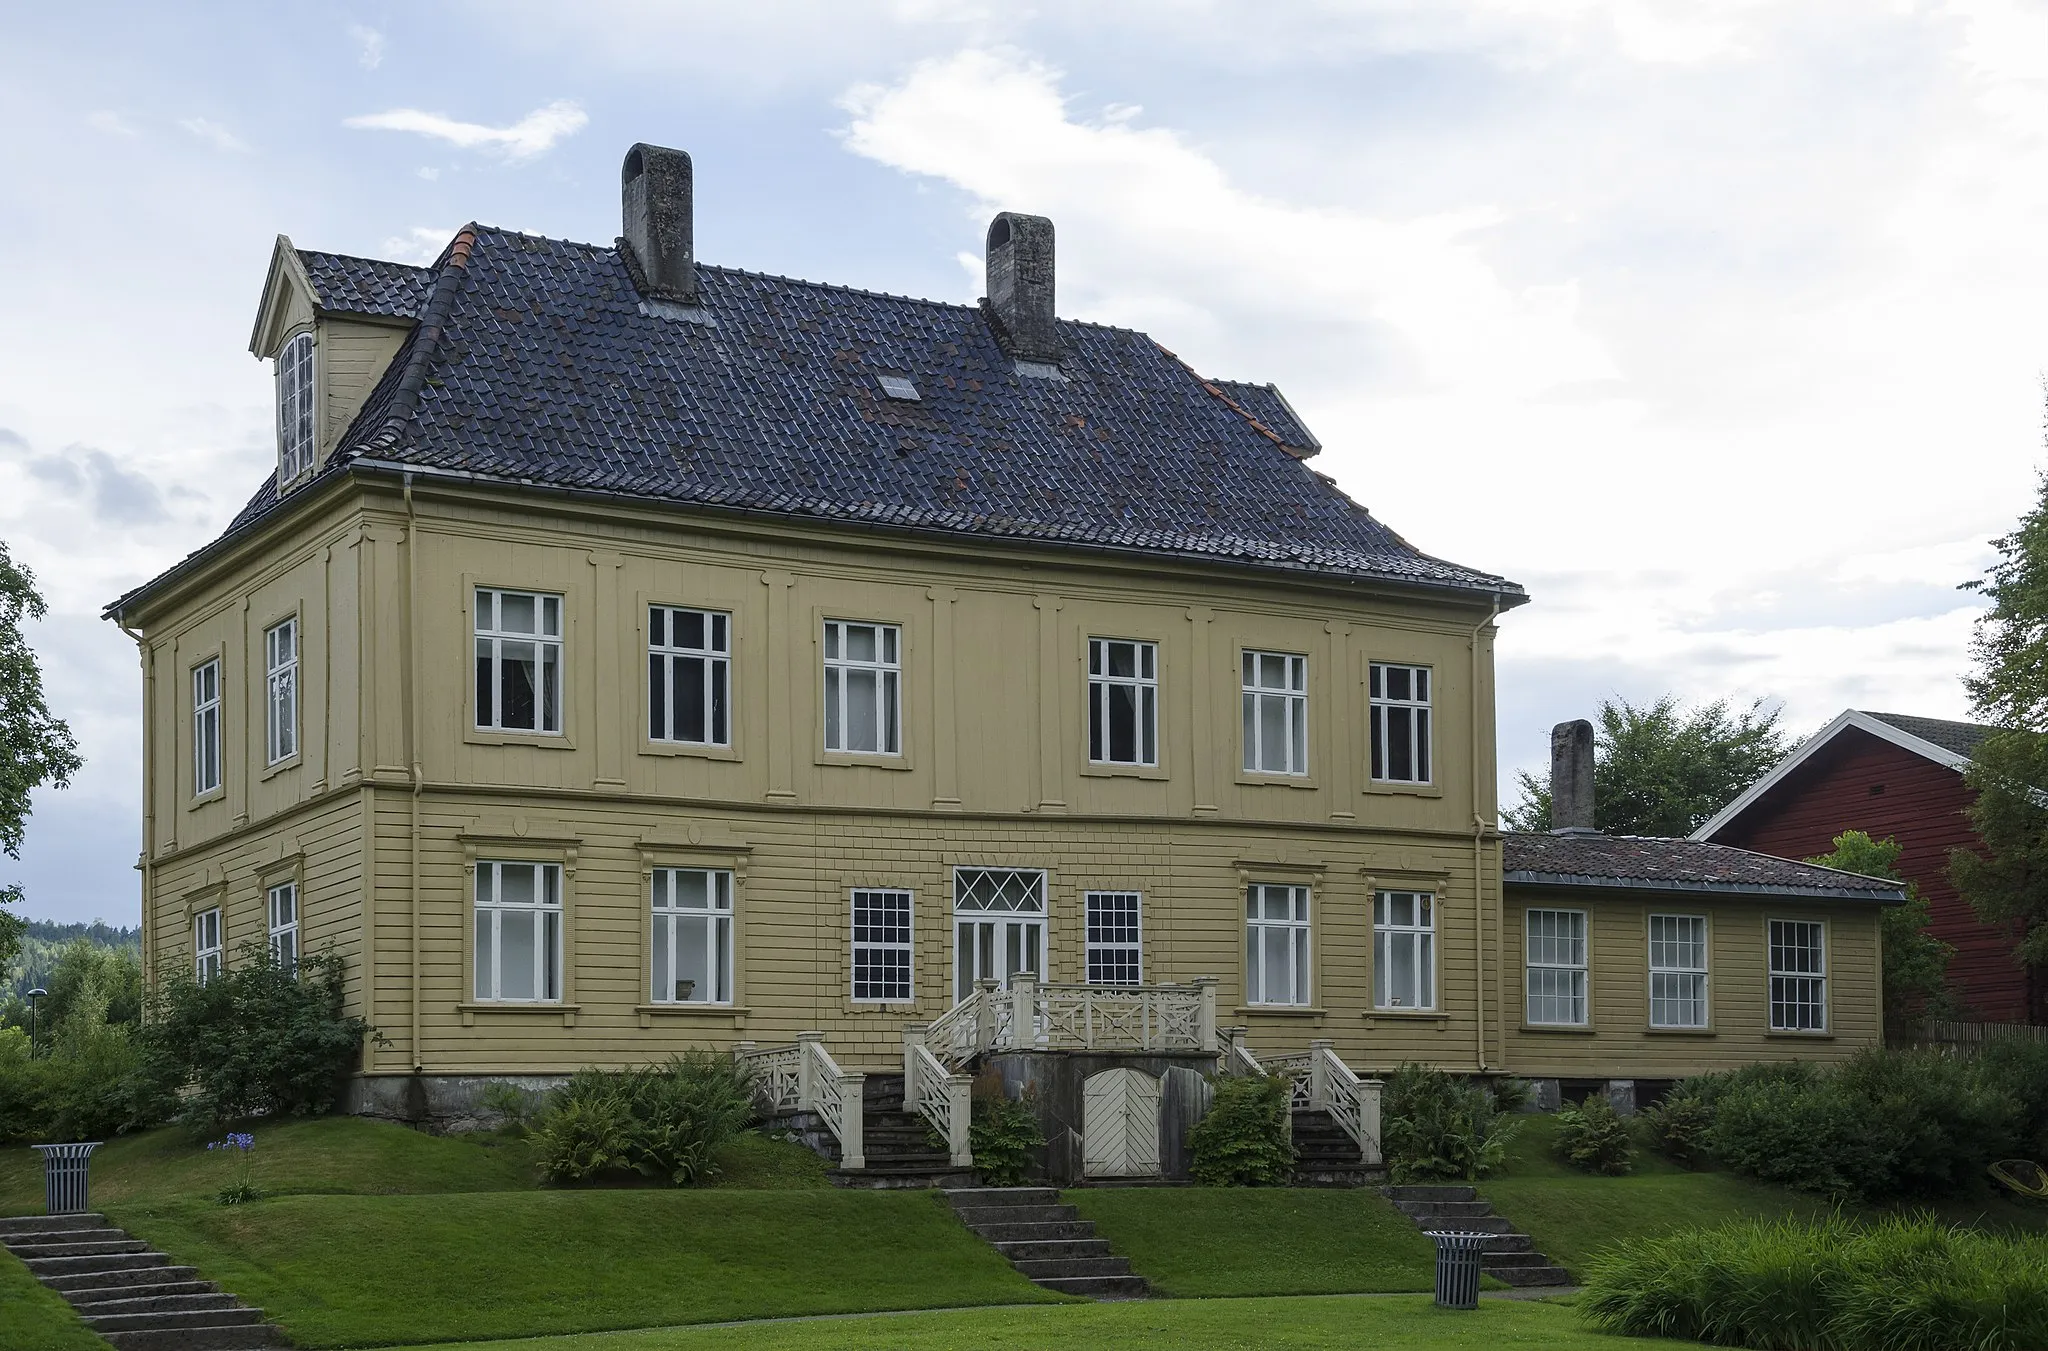 Photo showing: Rear view of Gulskogen (eng. Yellow forest) Manor, bought by Peter Nicolai Arbo and Anne Cathrine Collett in 1793 and turned into a manorial estate in the following years. It was made a museum in 1963. The house, its contents and the park surrounding the estate are intact from the 1800s.